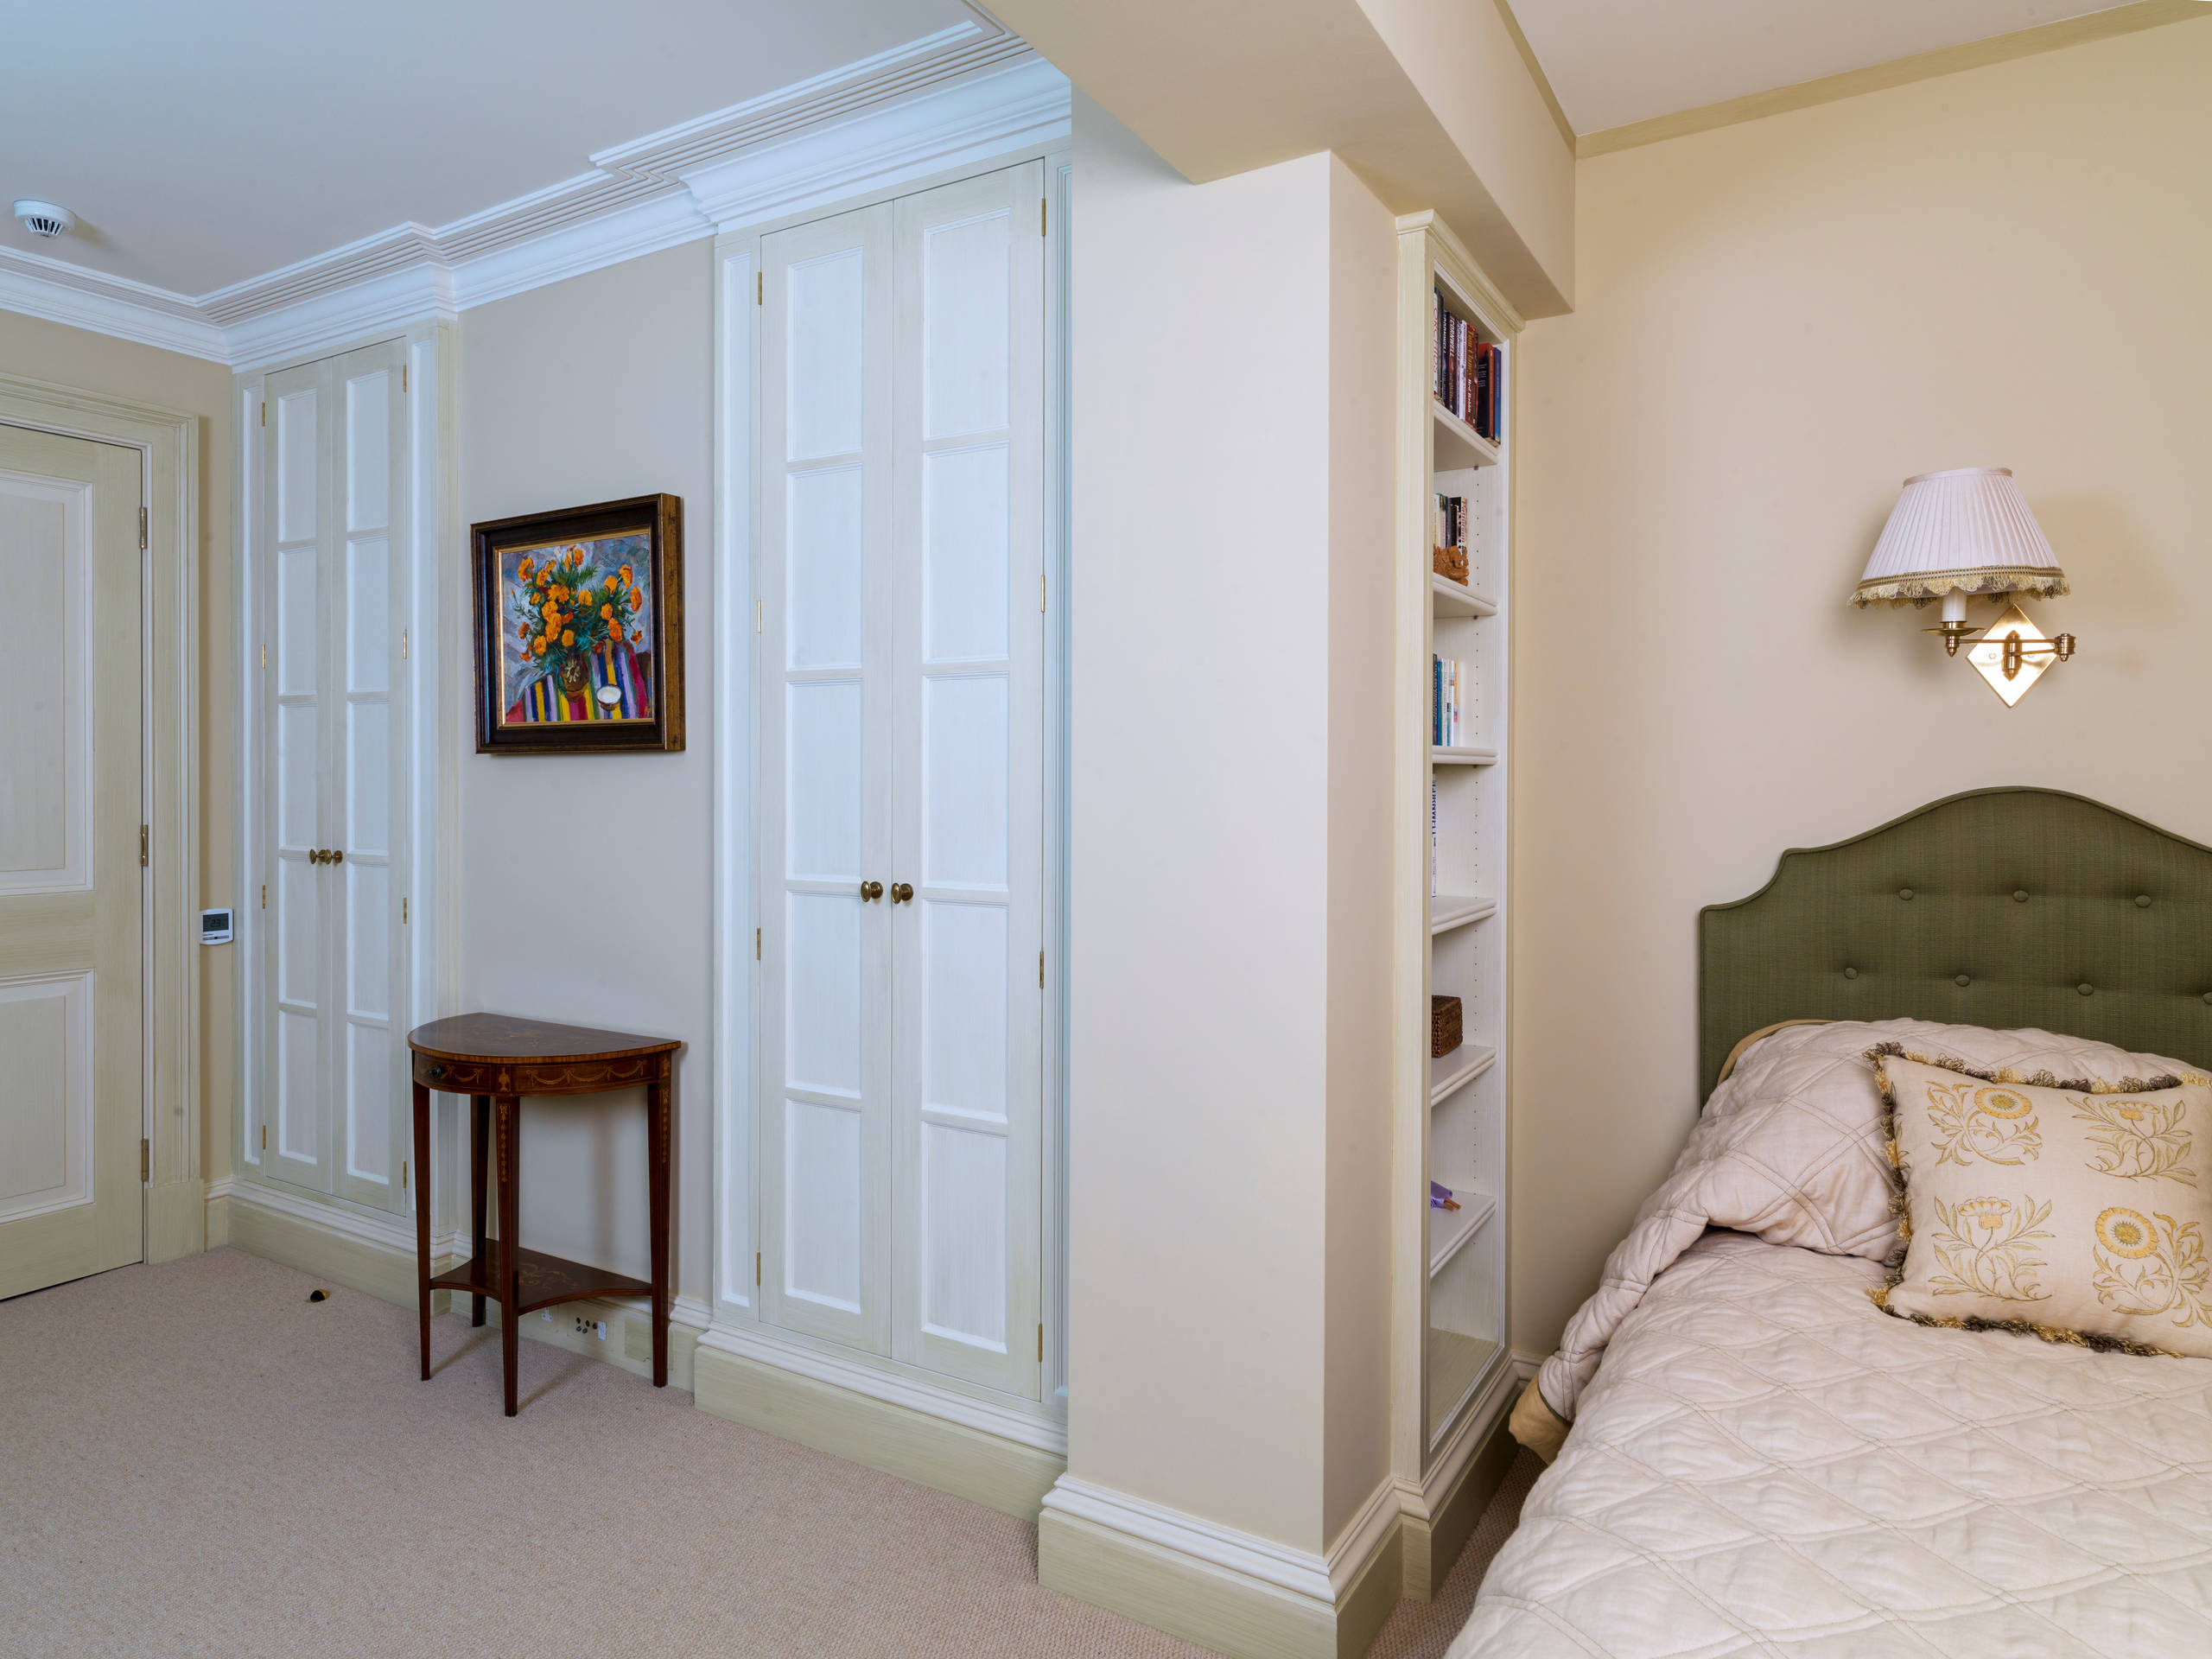 St James - Guest Bedroom Wardrobes designed and made by Tim Wood